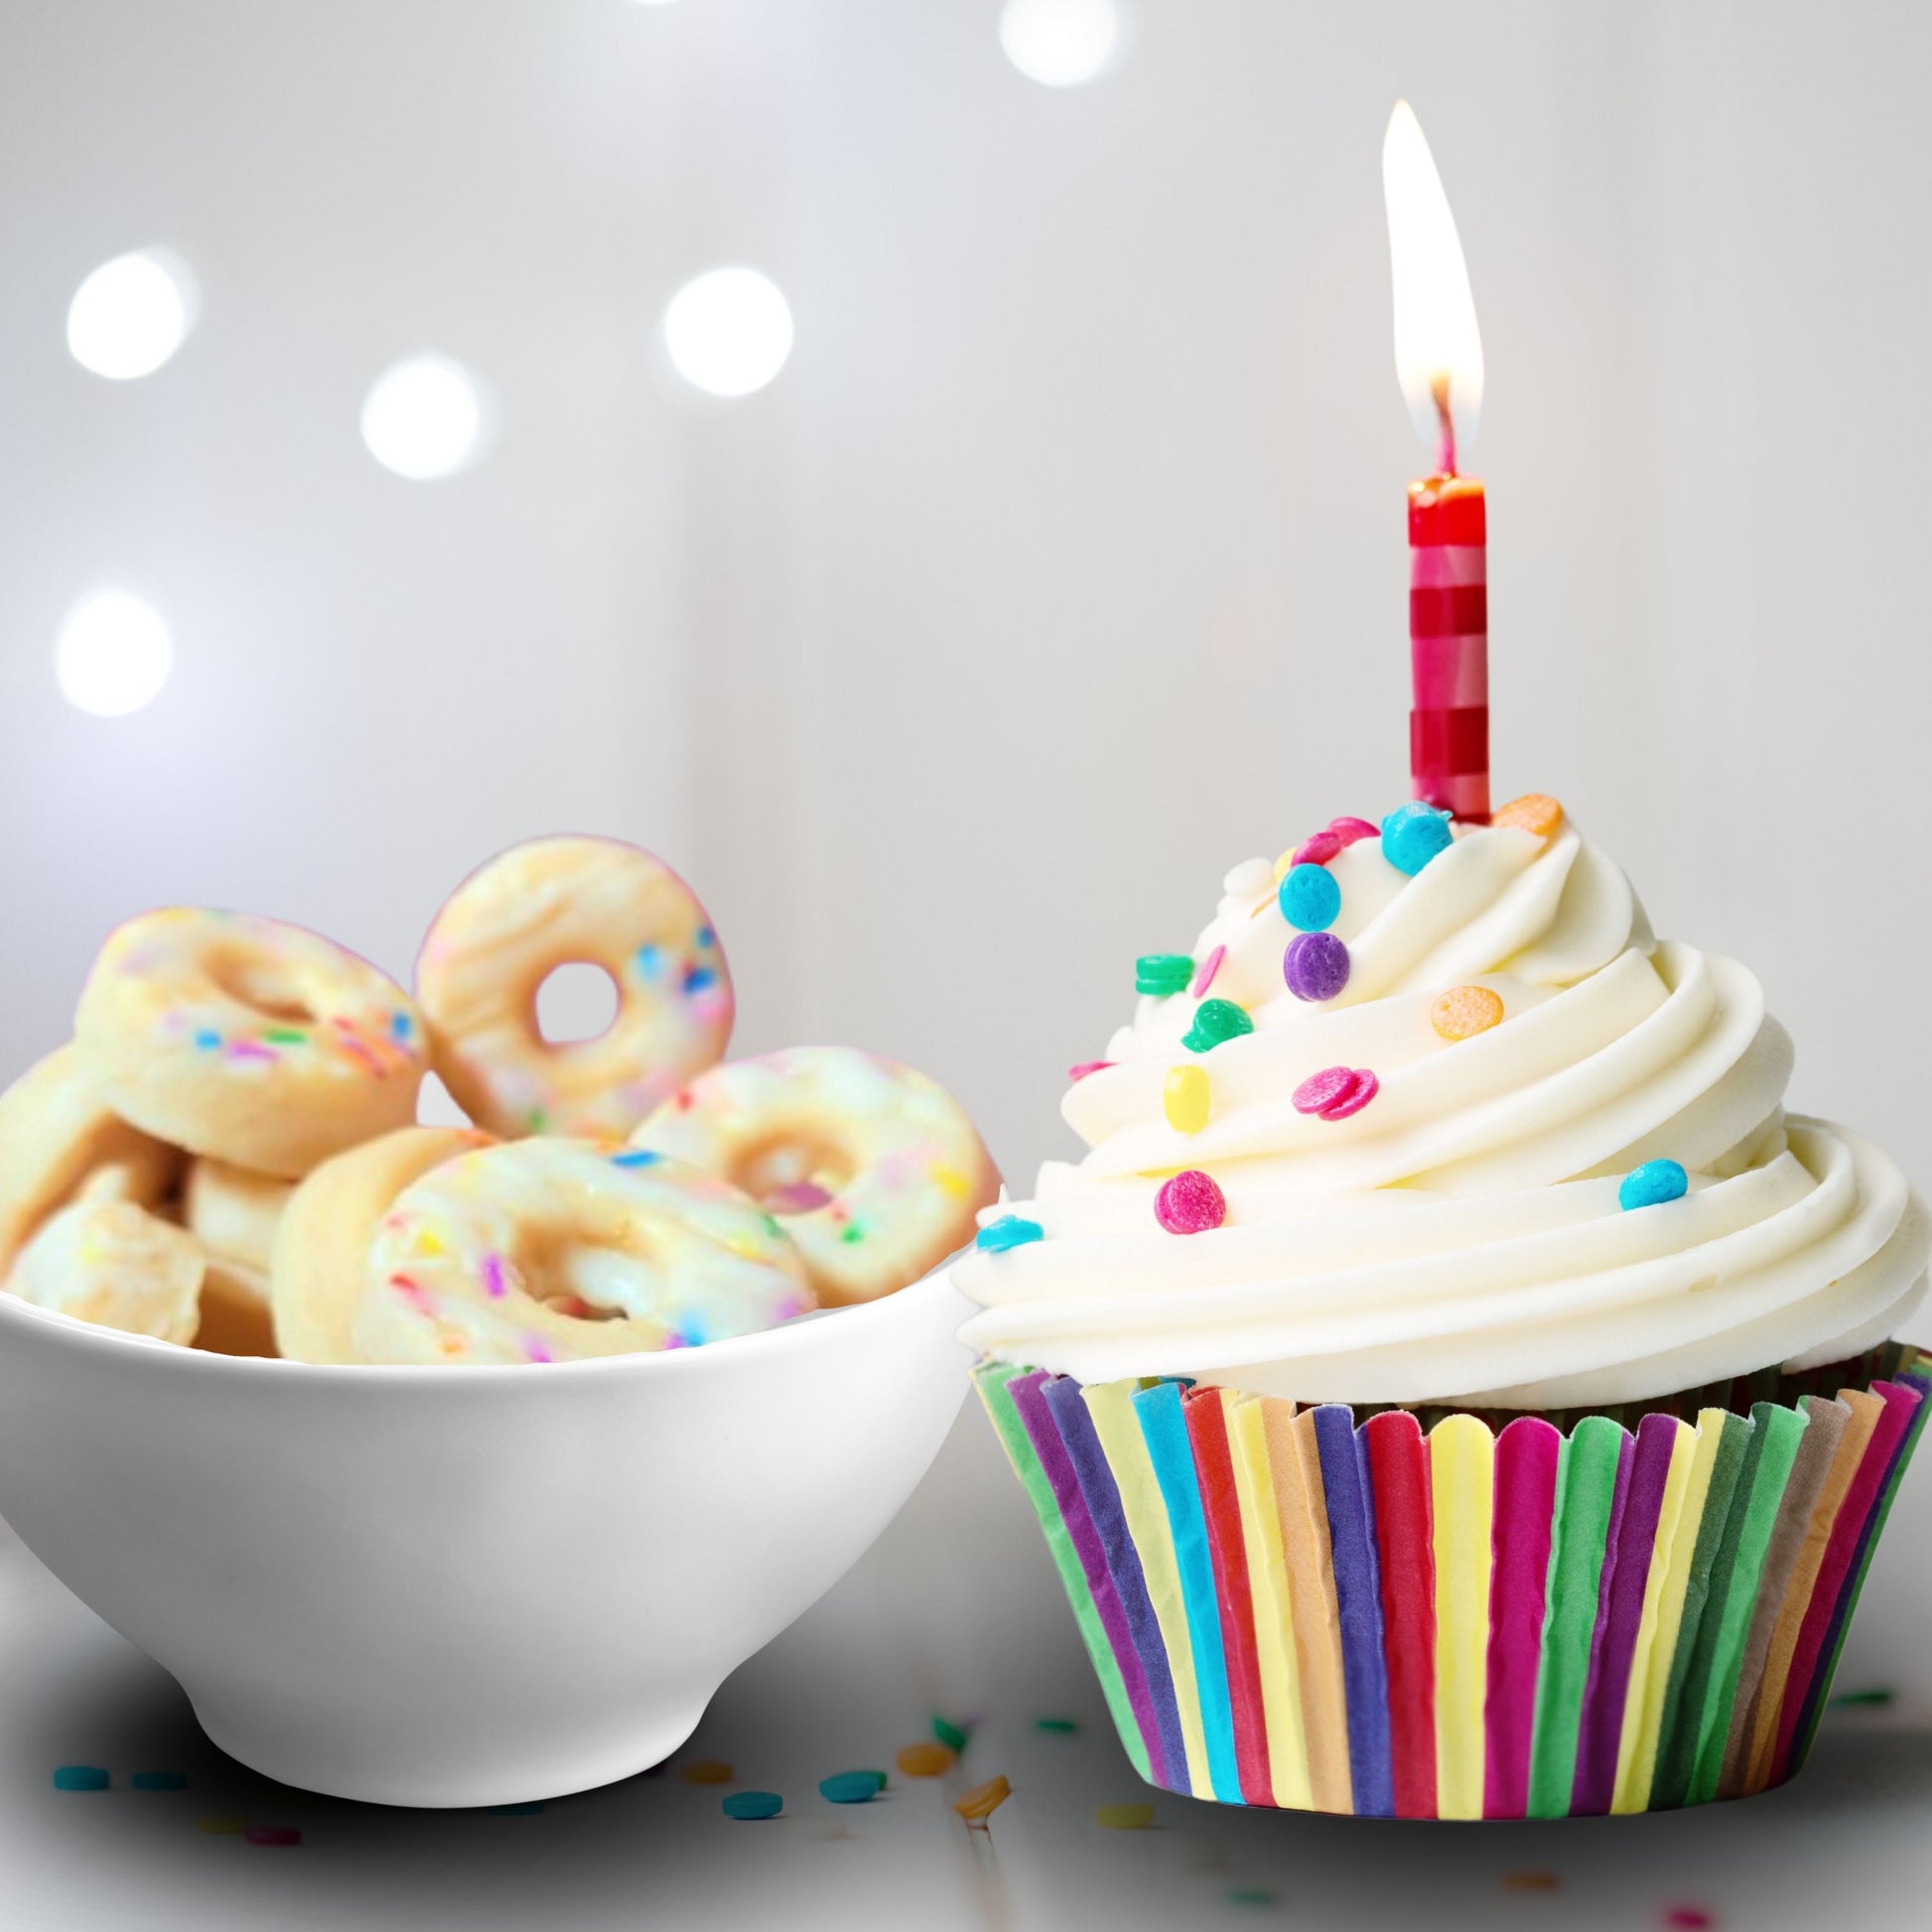 Cafe Delights Warm Birthday Cake Donut Scented Soy Wax Melts